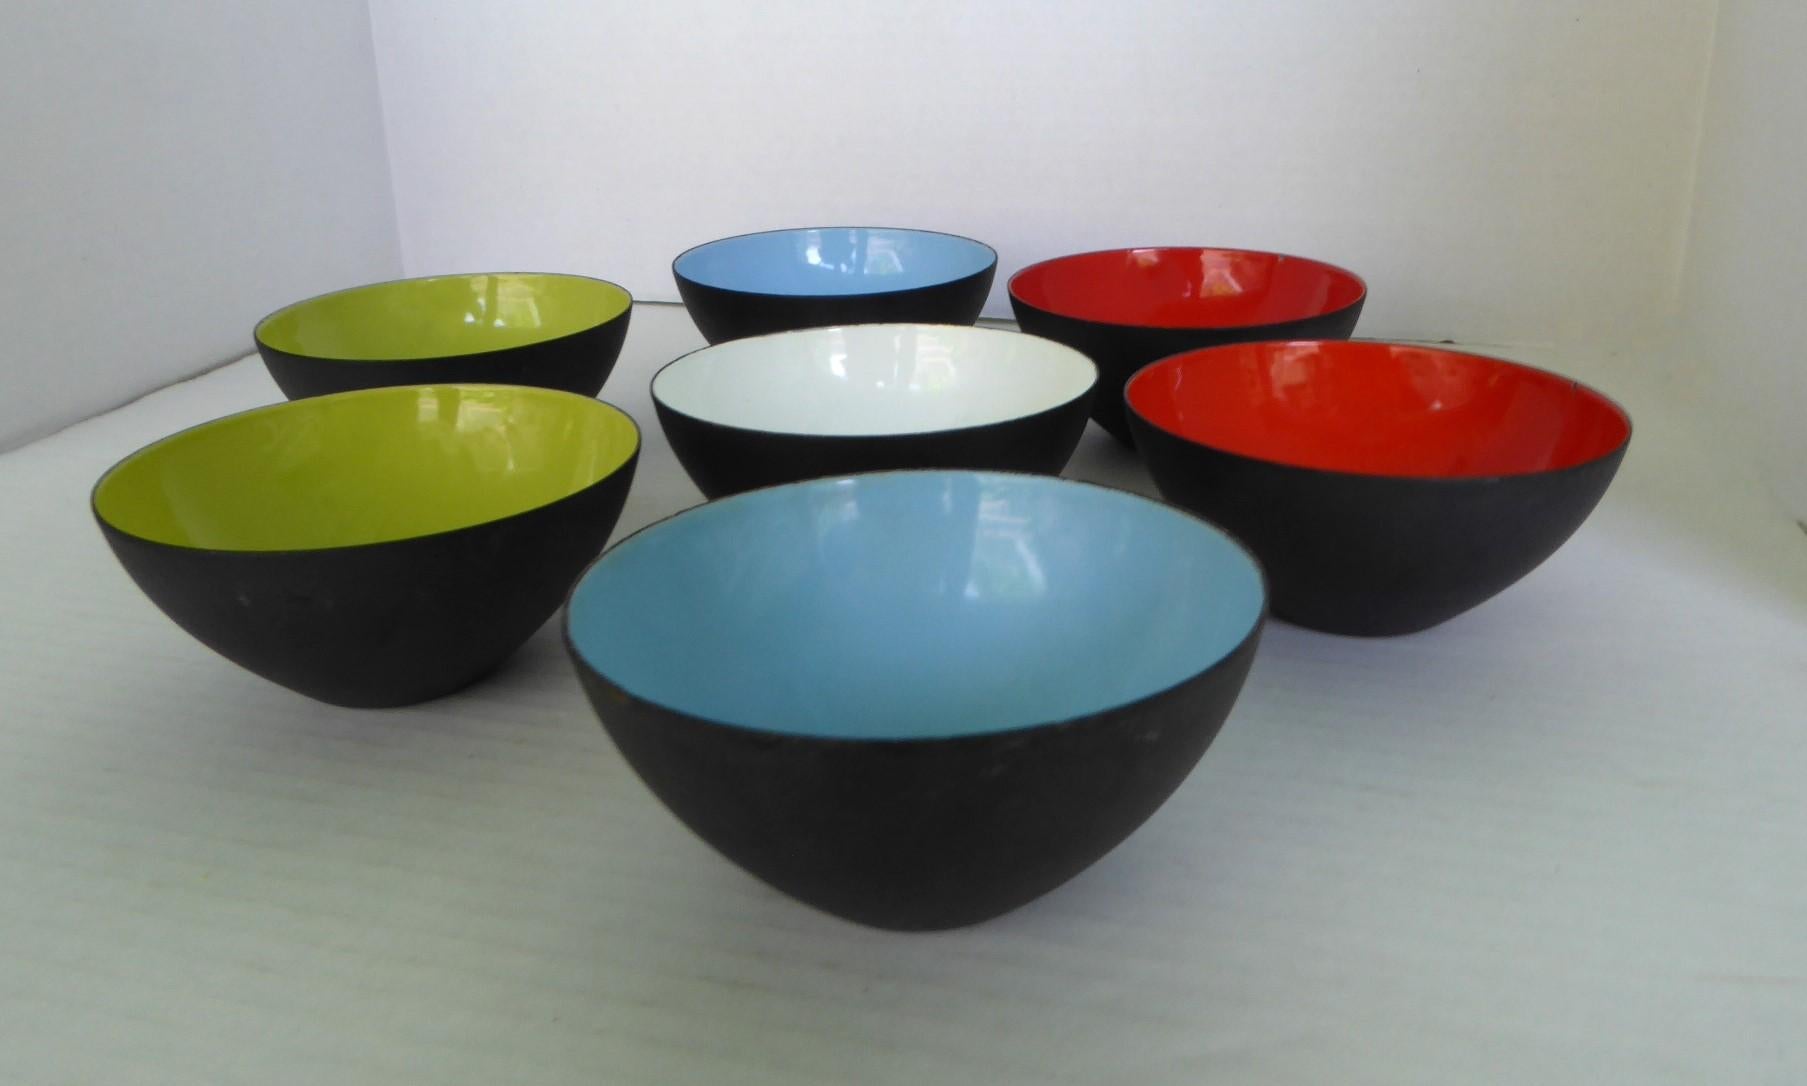 A set of Danish Mid Century Modern 7 Krenit Bowls in the original first size, 4. 90 “diameter, that was created by Herbert Krenchel in 1953.  Torben Orskov of Denmark was the original retailer of the Krenit bowls until 1964. The Krenit came in 9